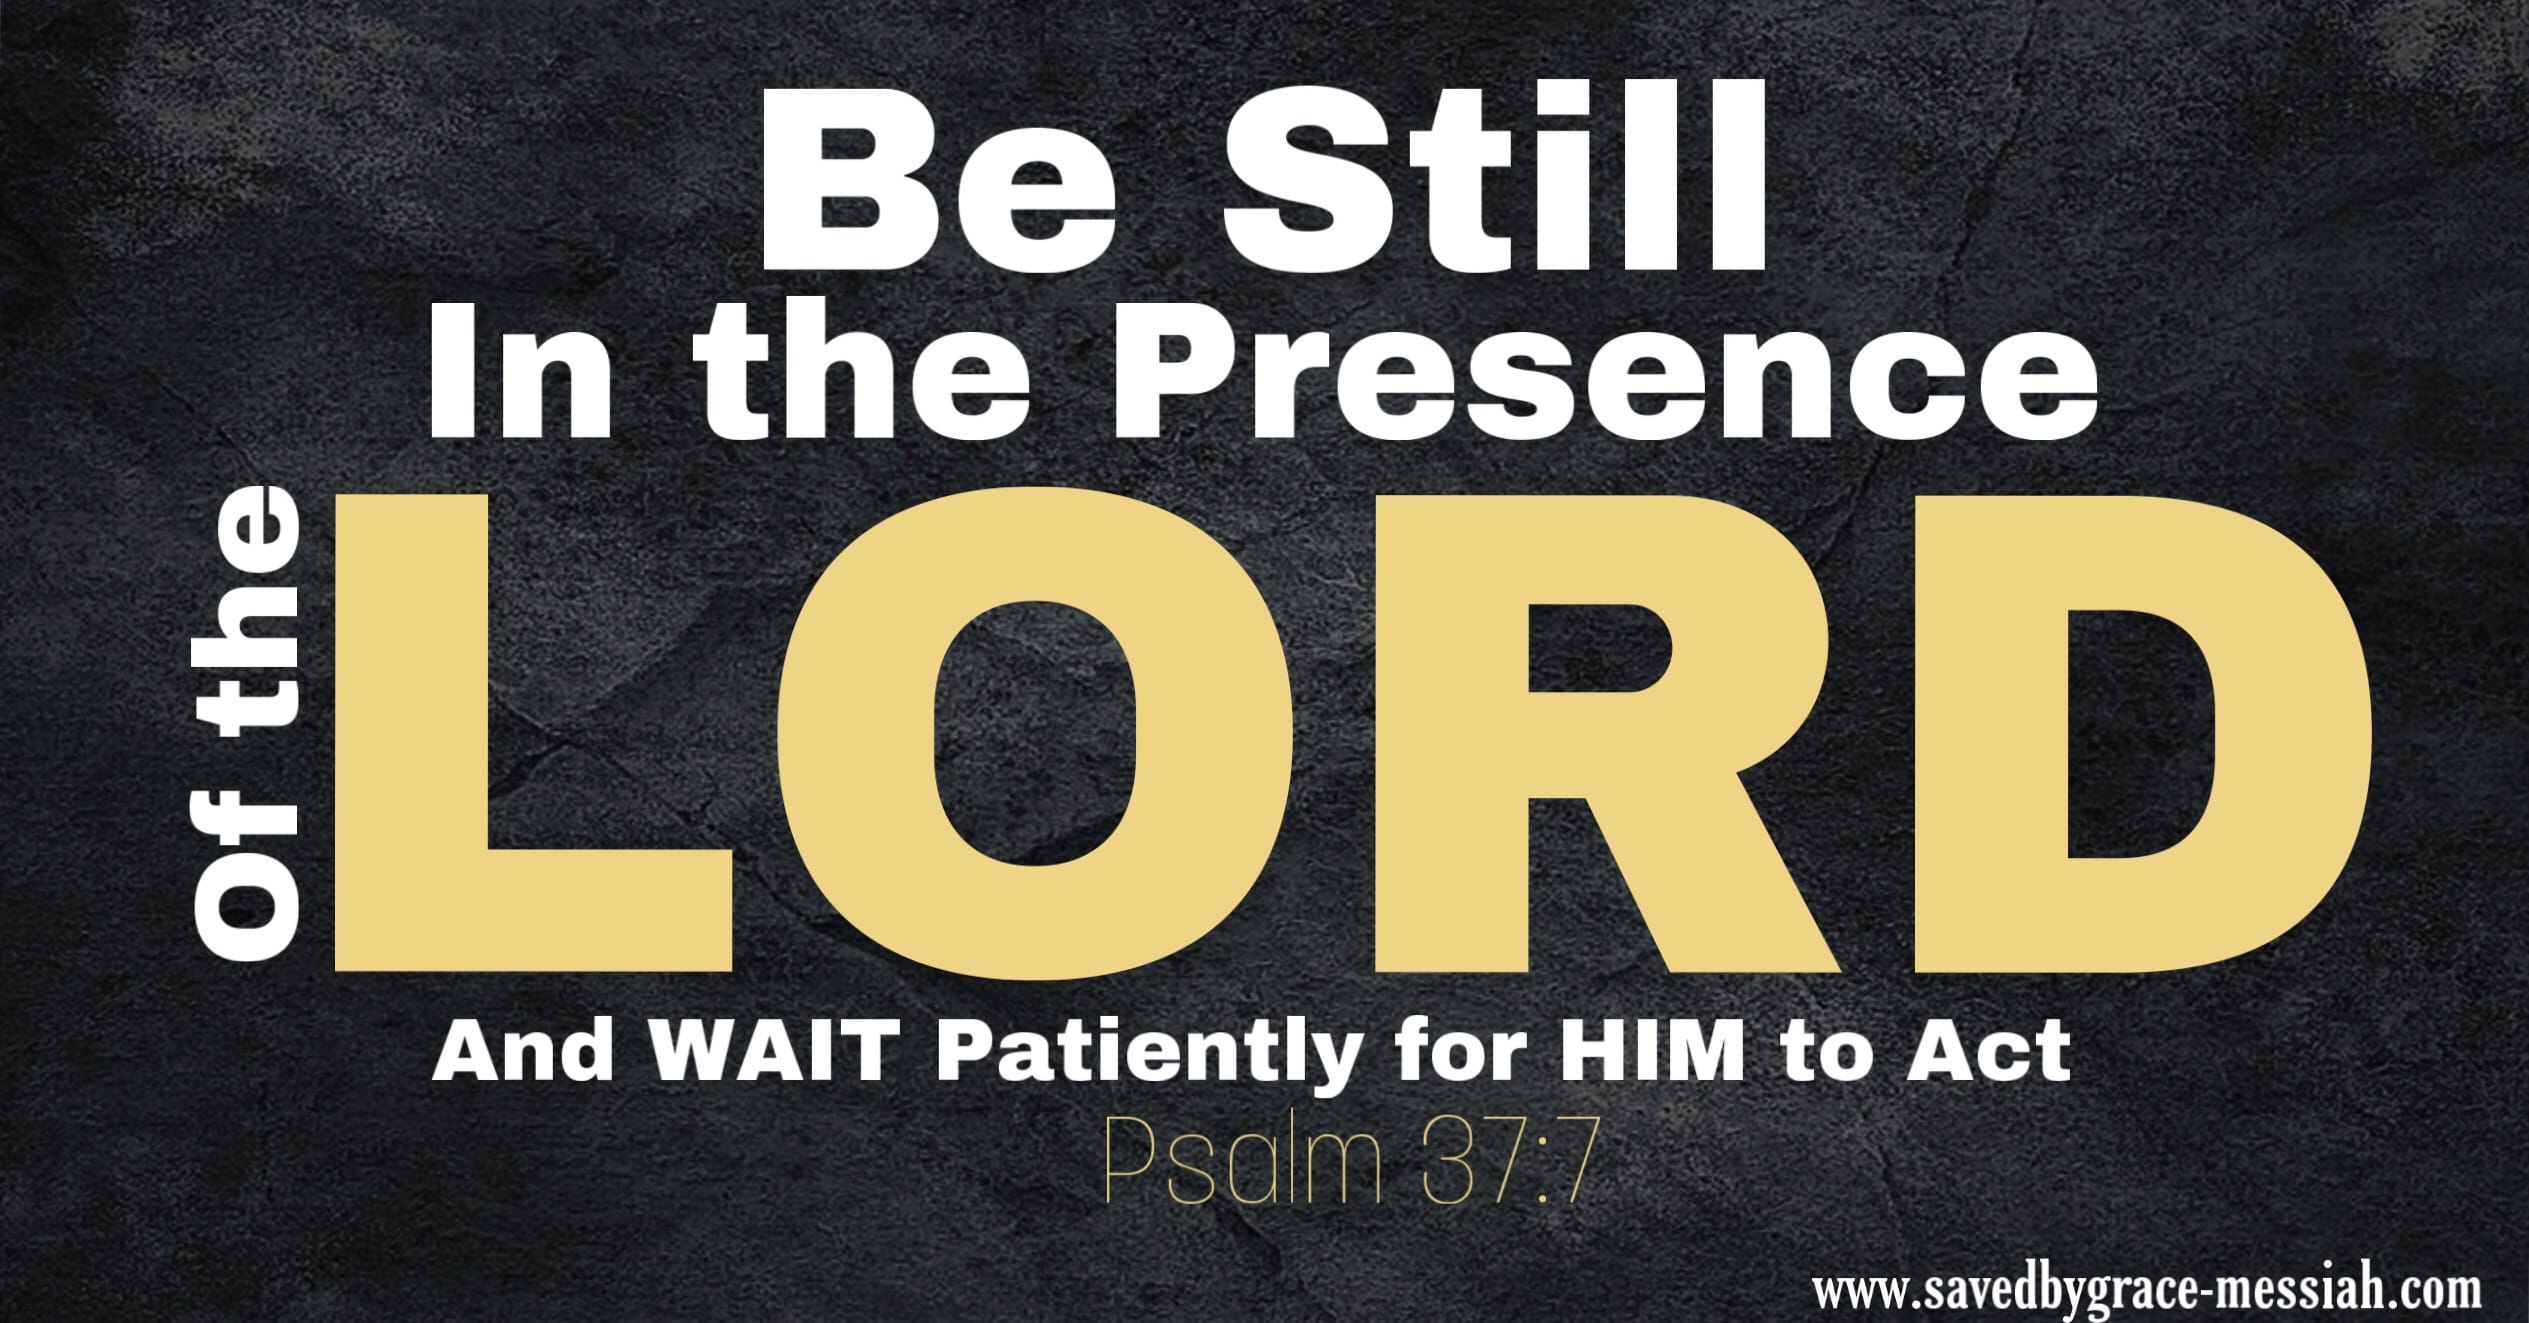 Be Still in the presence of the Lord